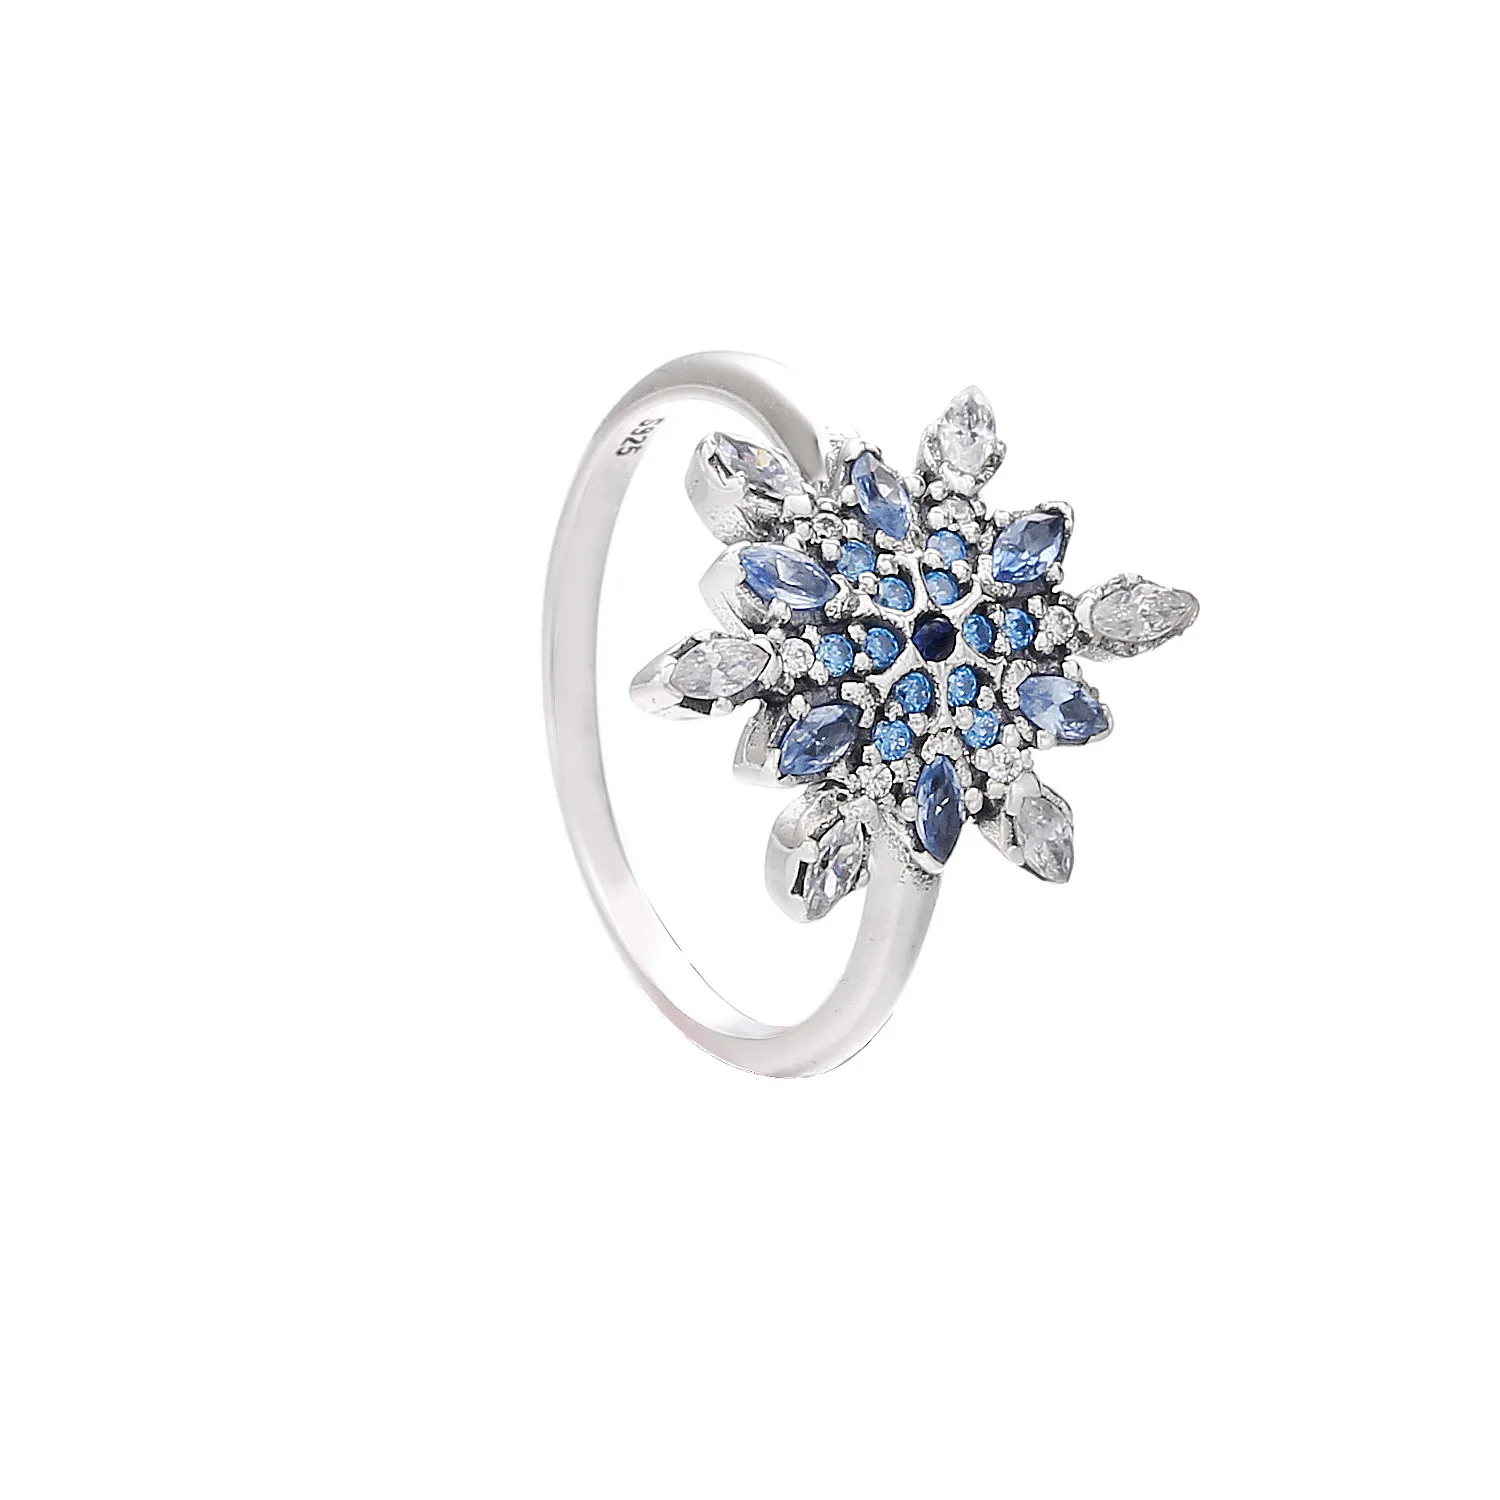 Ring 100% 925 Sterling Silver Snowflake Rings Anneau with Blue Cz Jewelry Anillo Engagement Wedding Lovers Fashion Ring